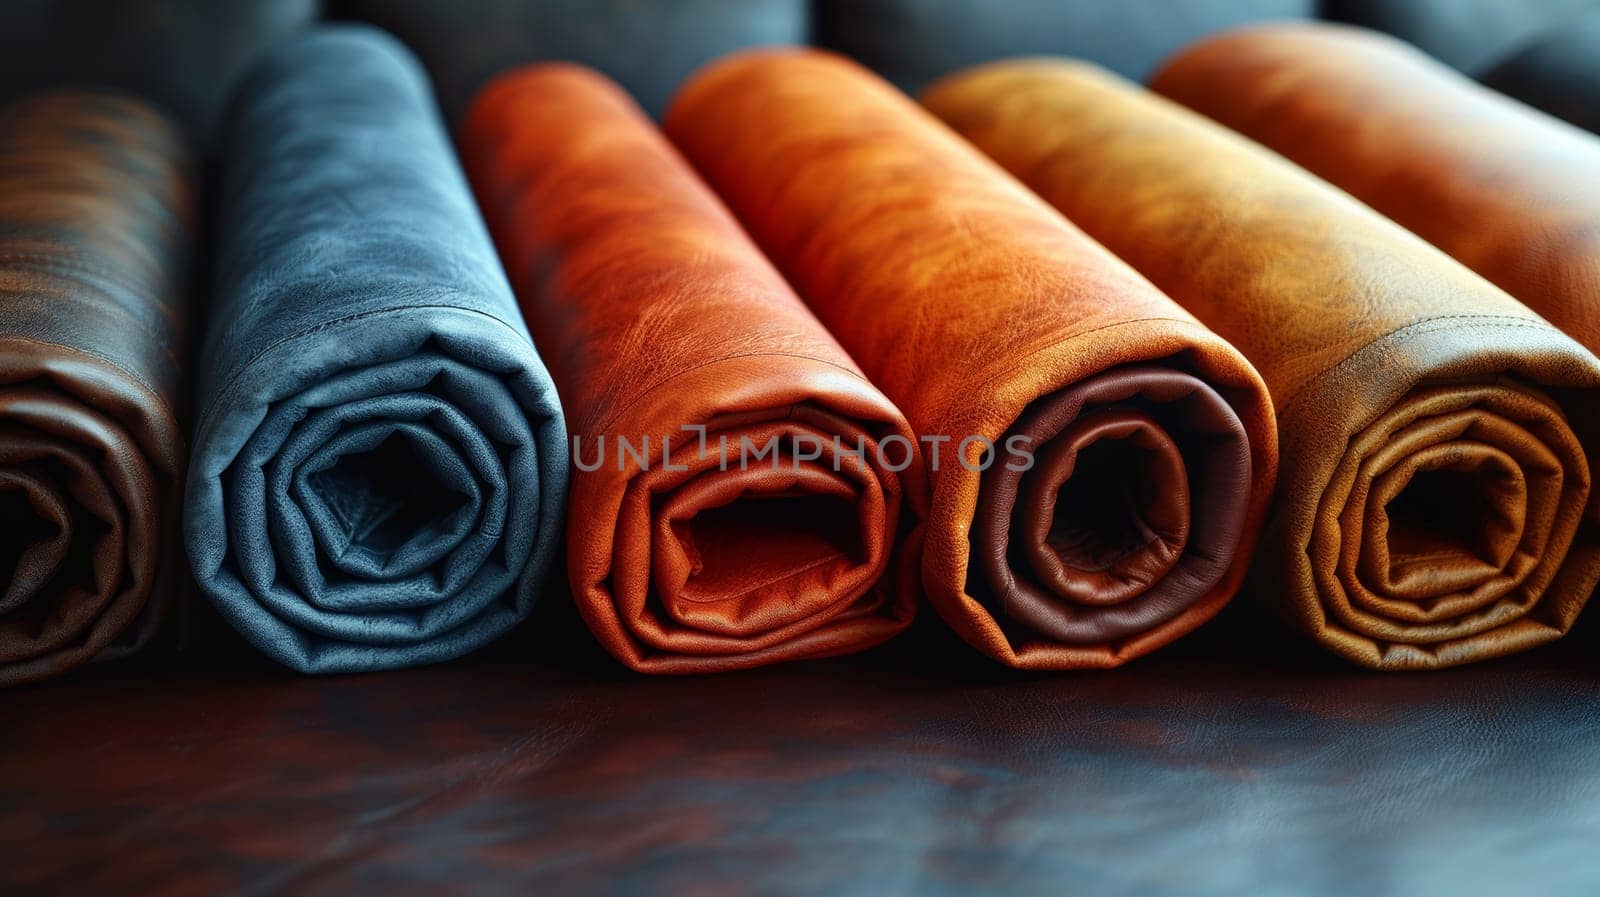 A row of leather rolls sitting on a black surface